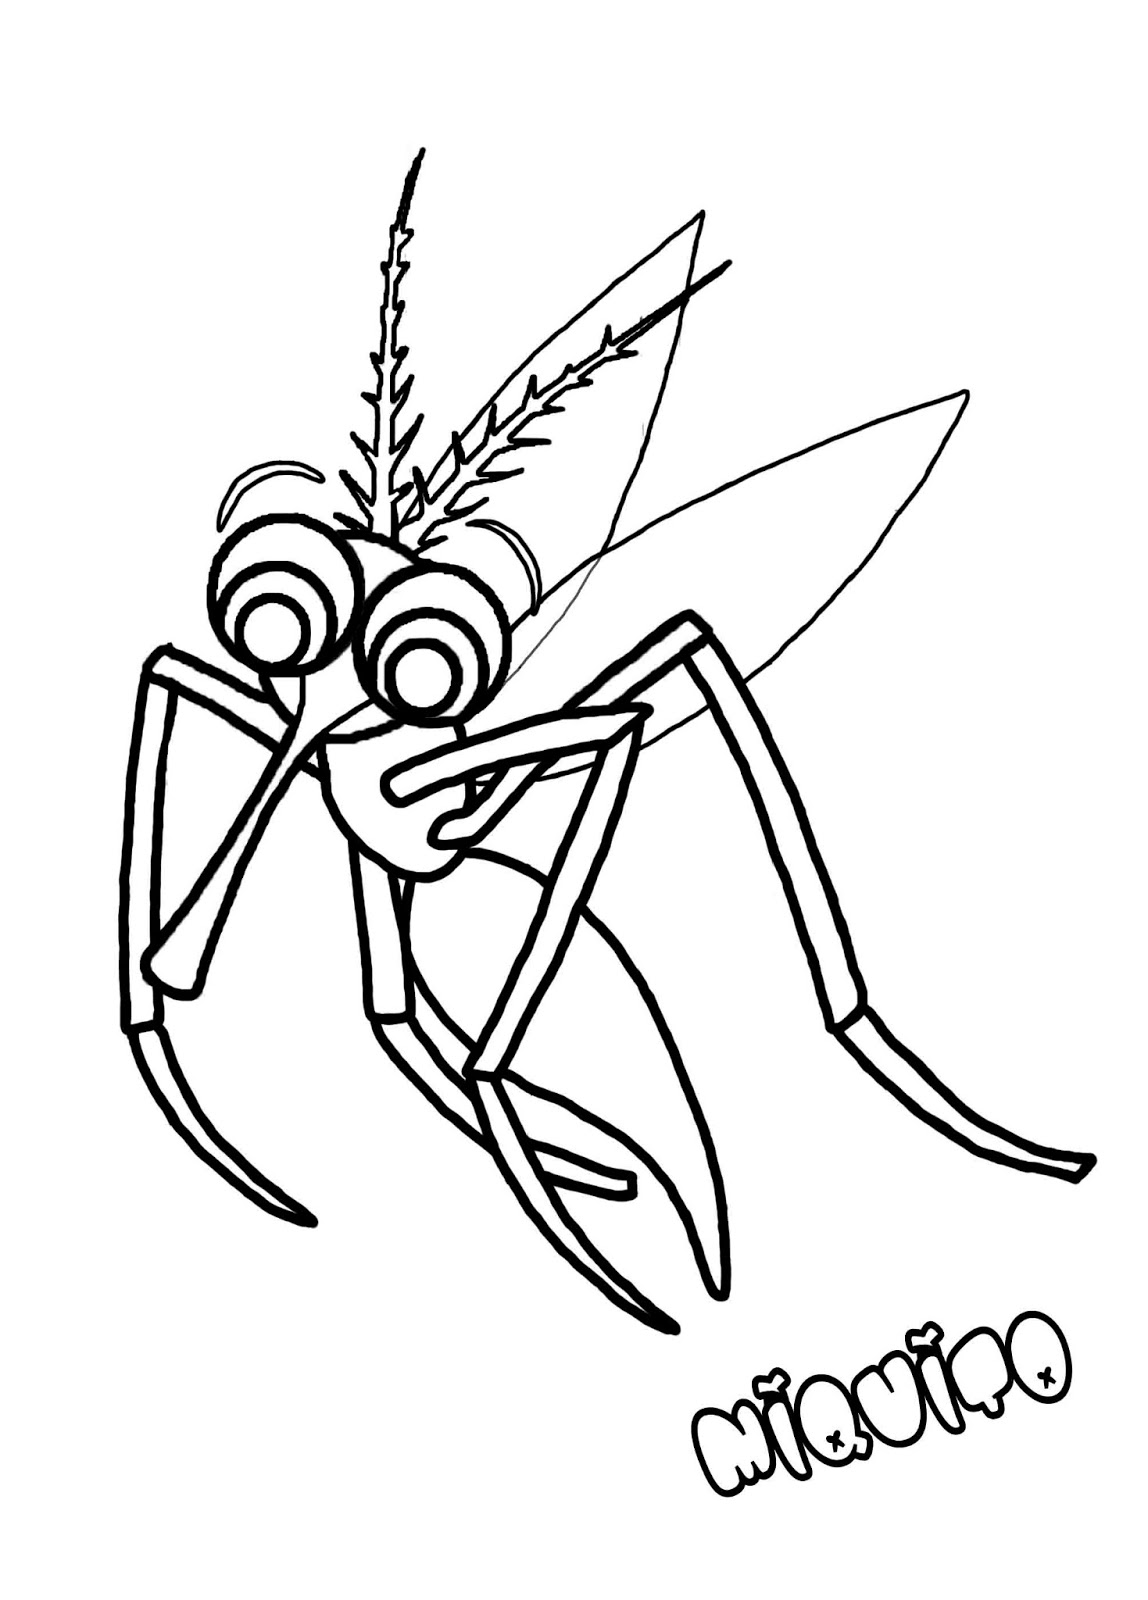 Free Printable Mosquito Coloring Pages For Kids